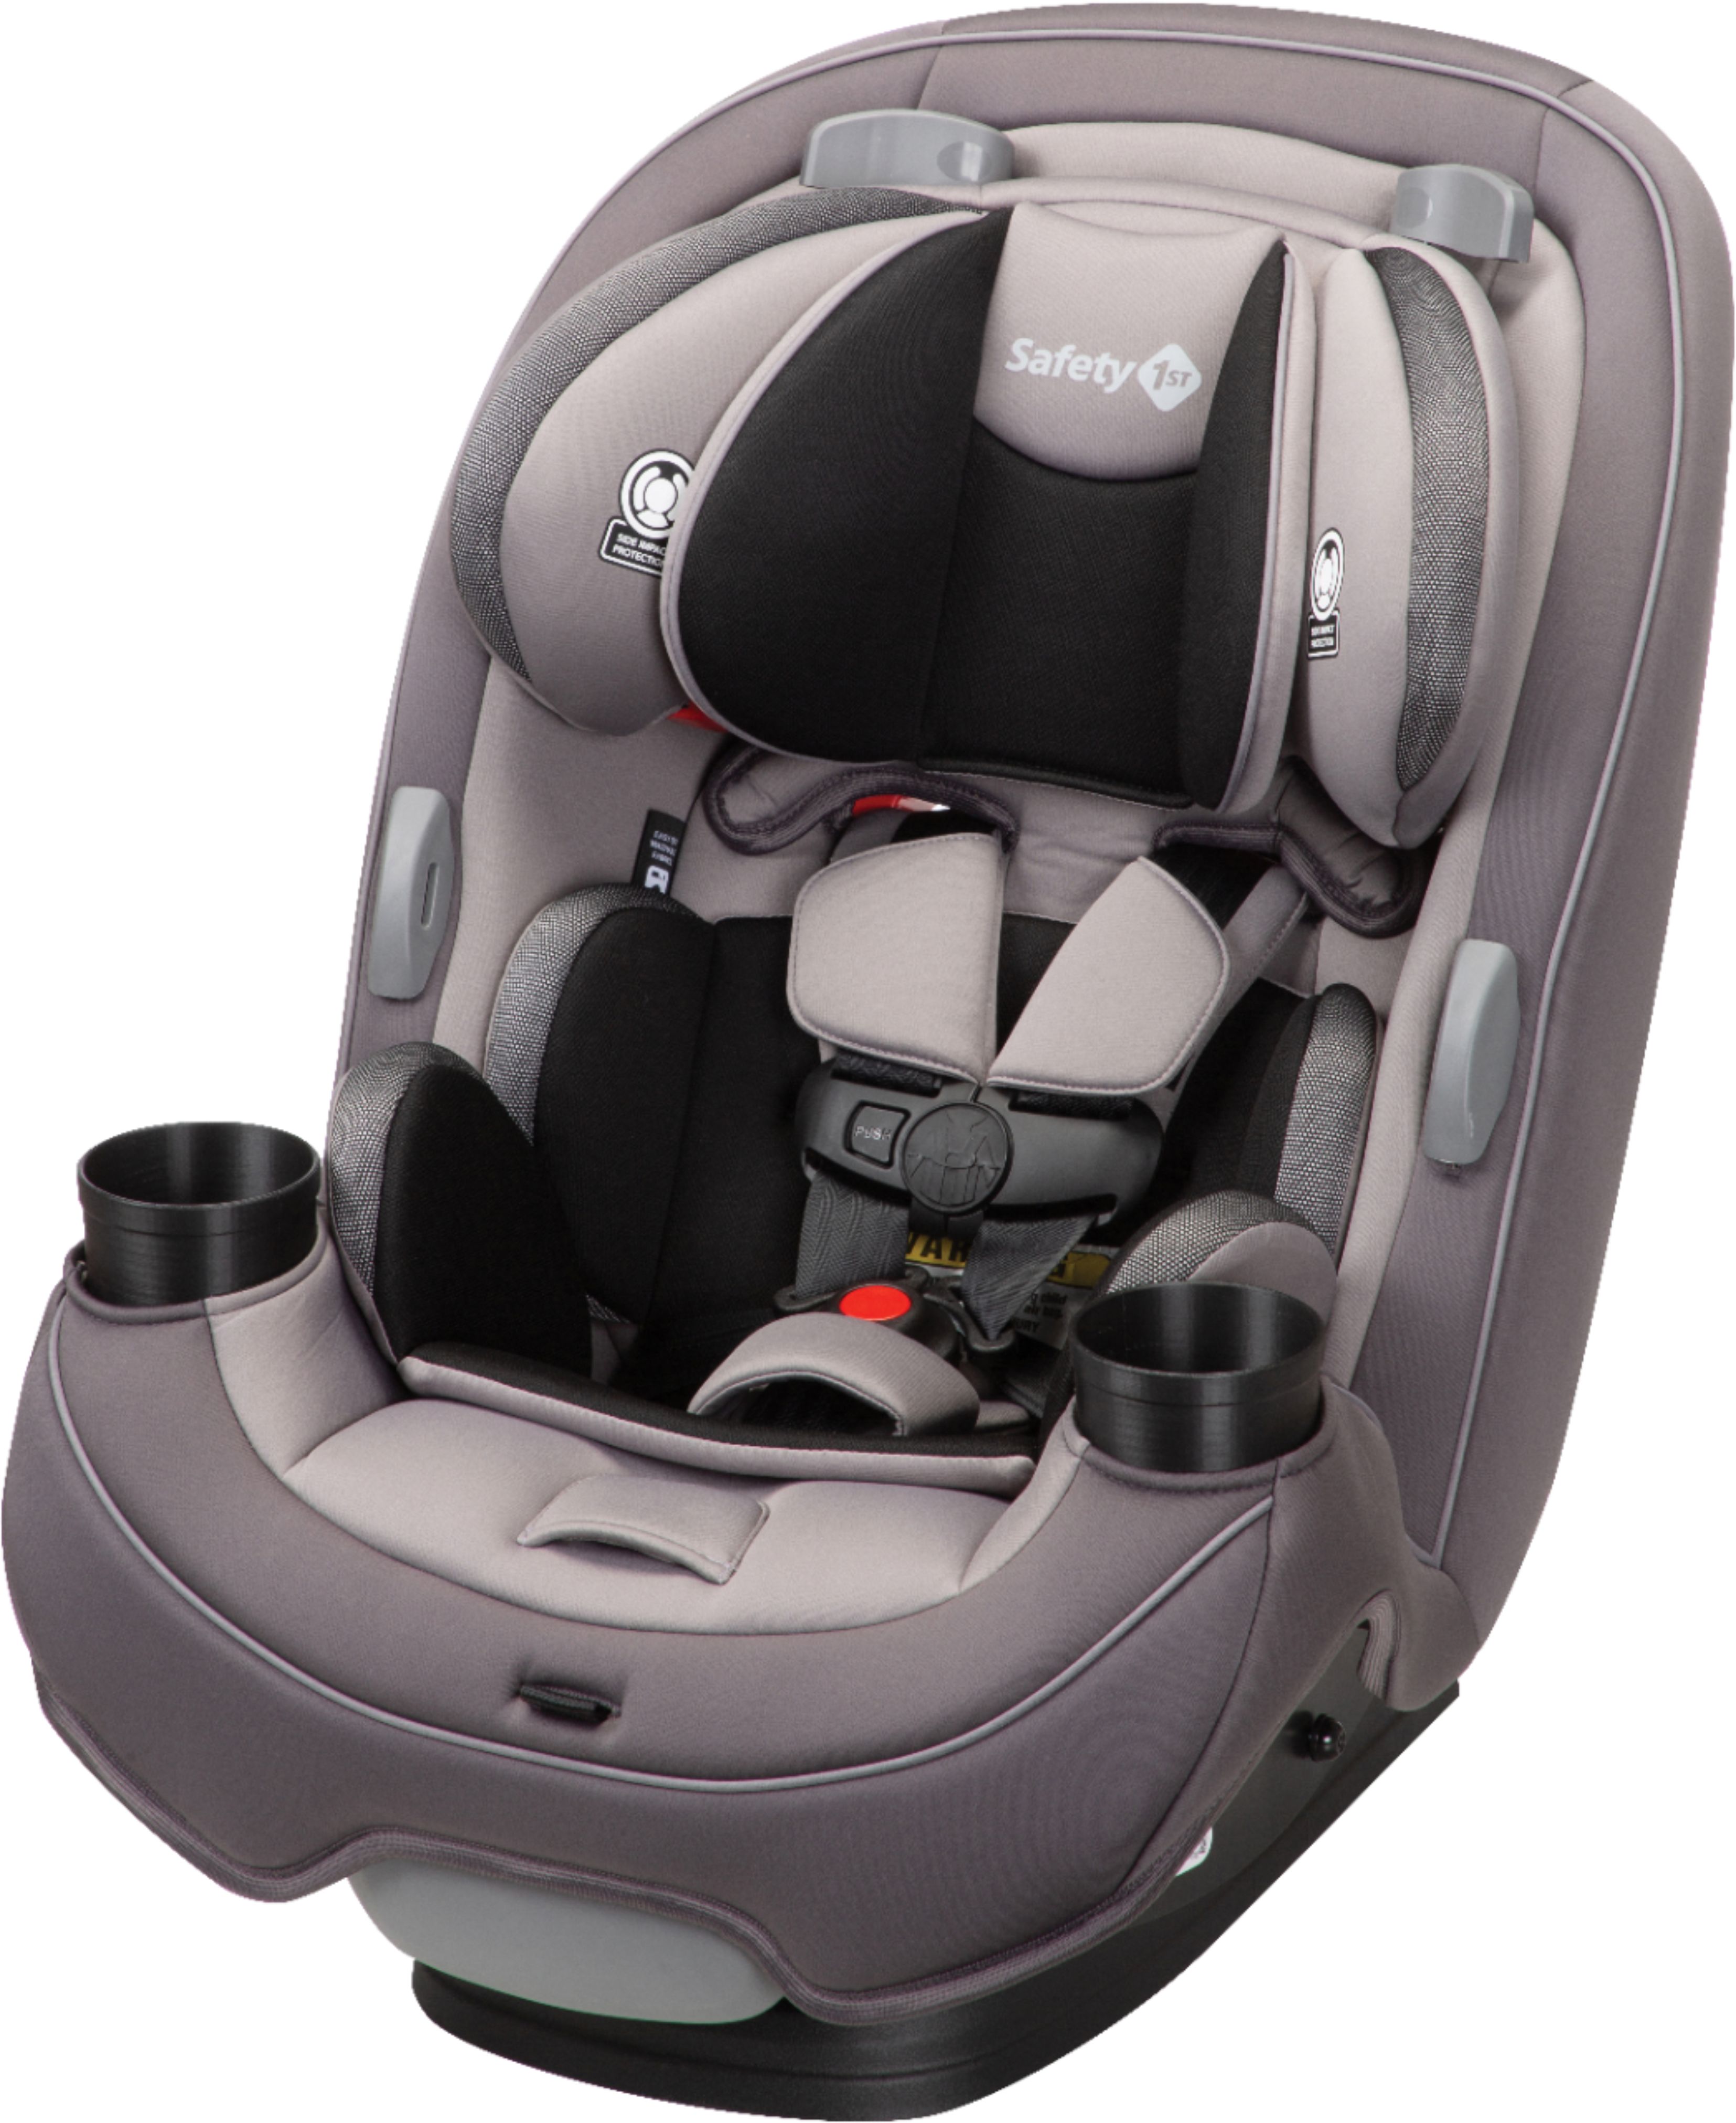 Left View: Safety 1st - OnBoard 35LT Infant car seat - Grey